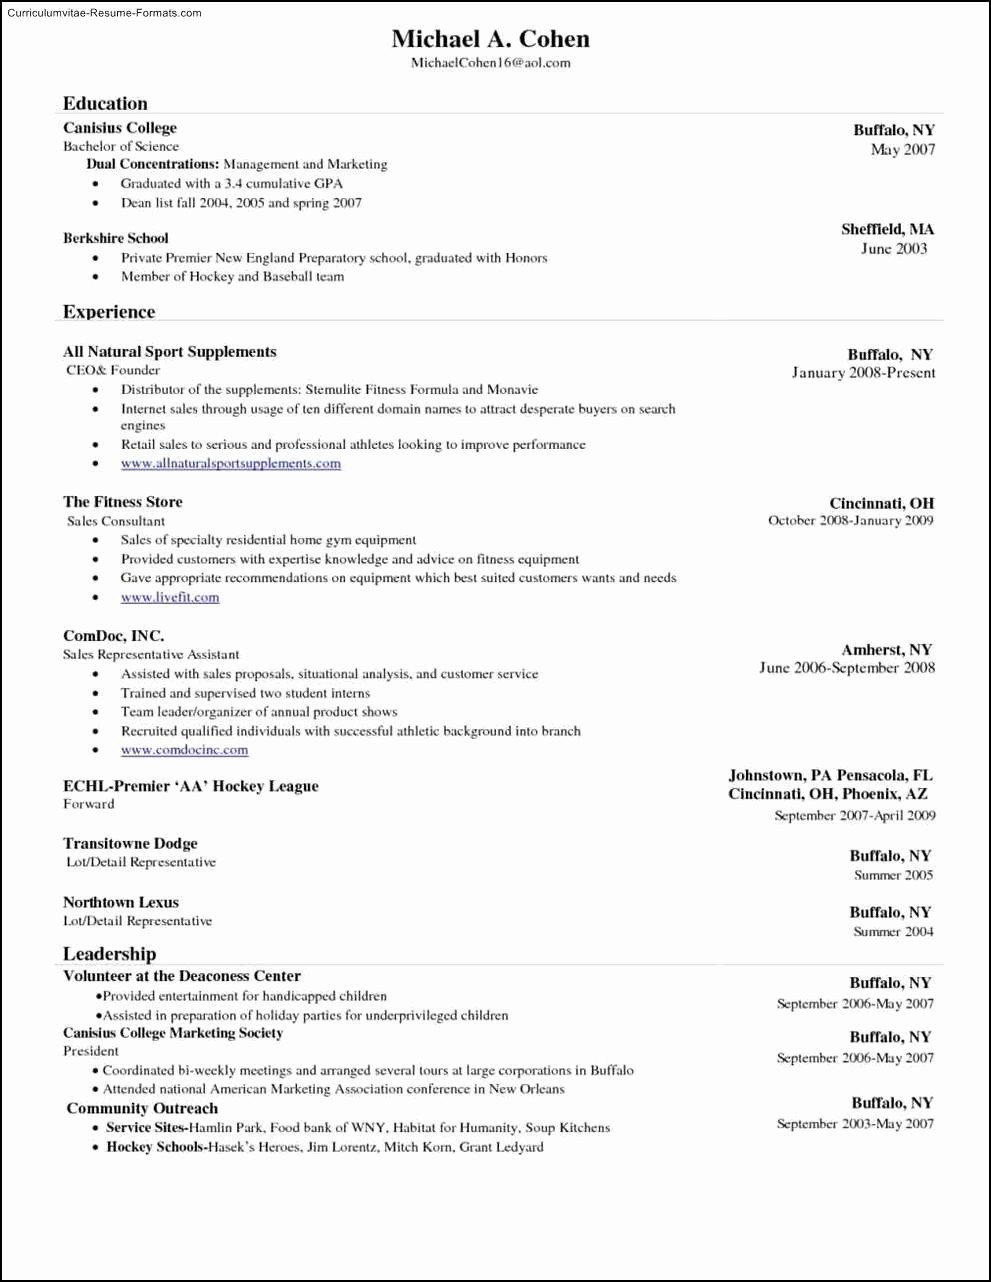 Resume Template Ms Word 2010 Awesome How to Write Equations In Microsoft Word Starter 2010